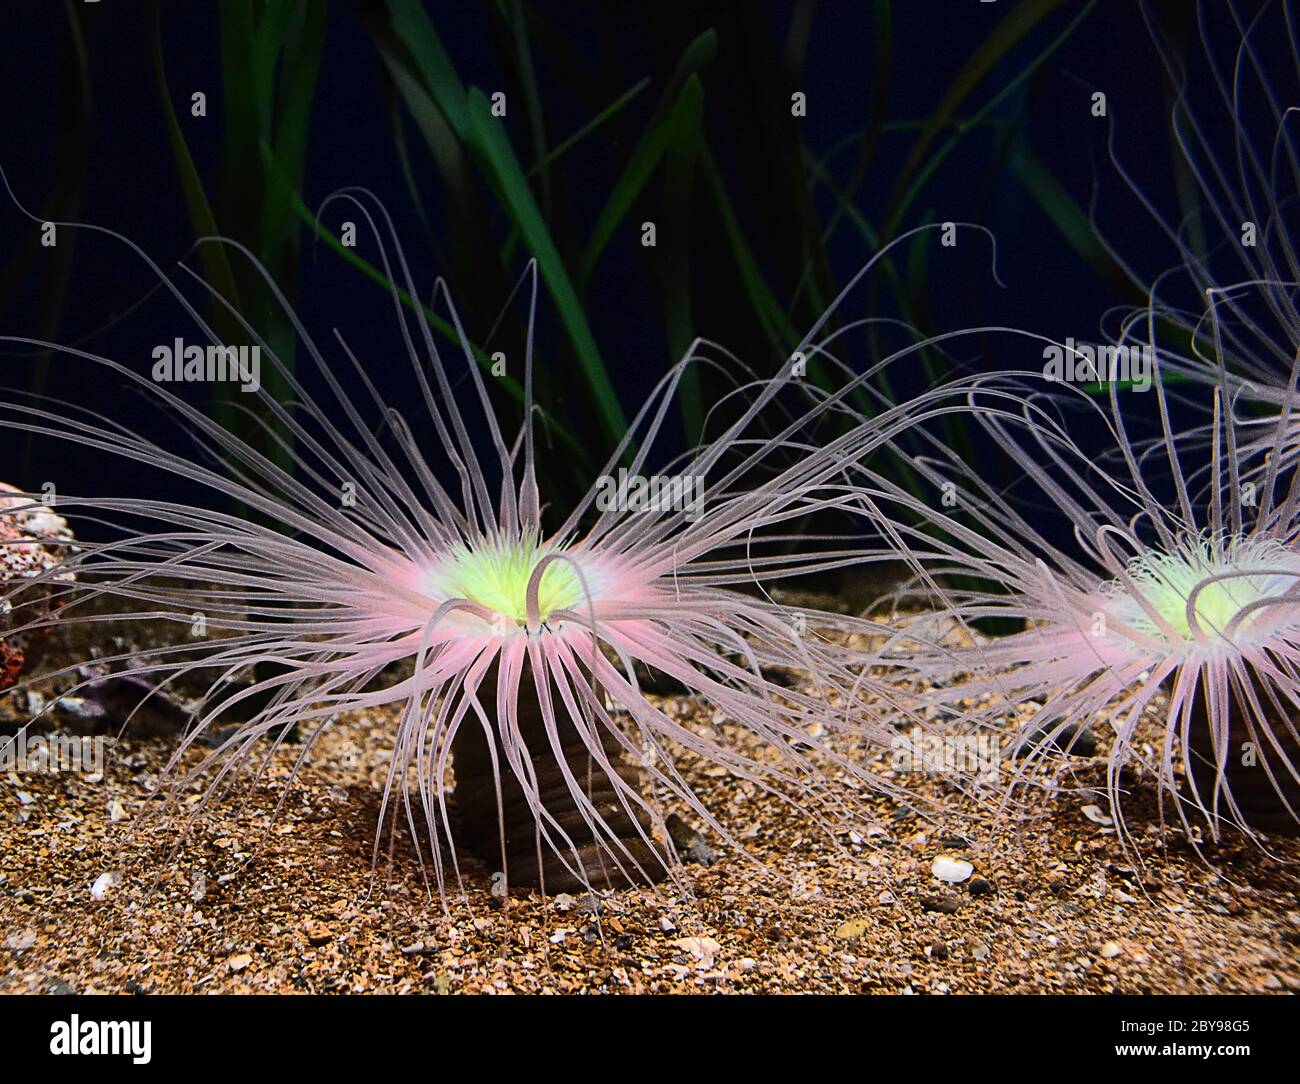 Various brightly colored anemones, tentacles, dark background Stock Photo